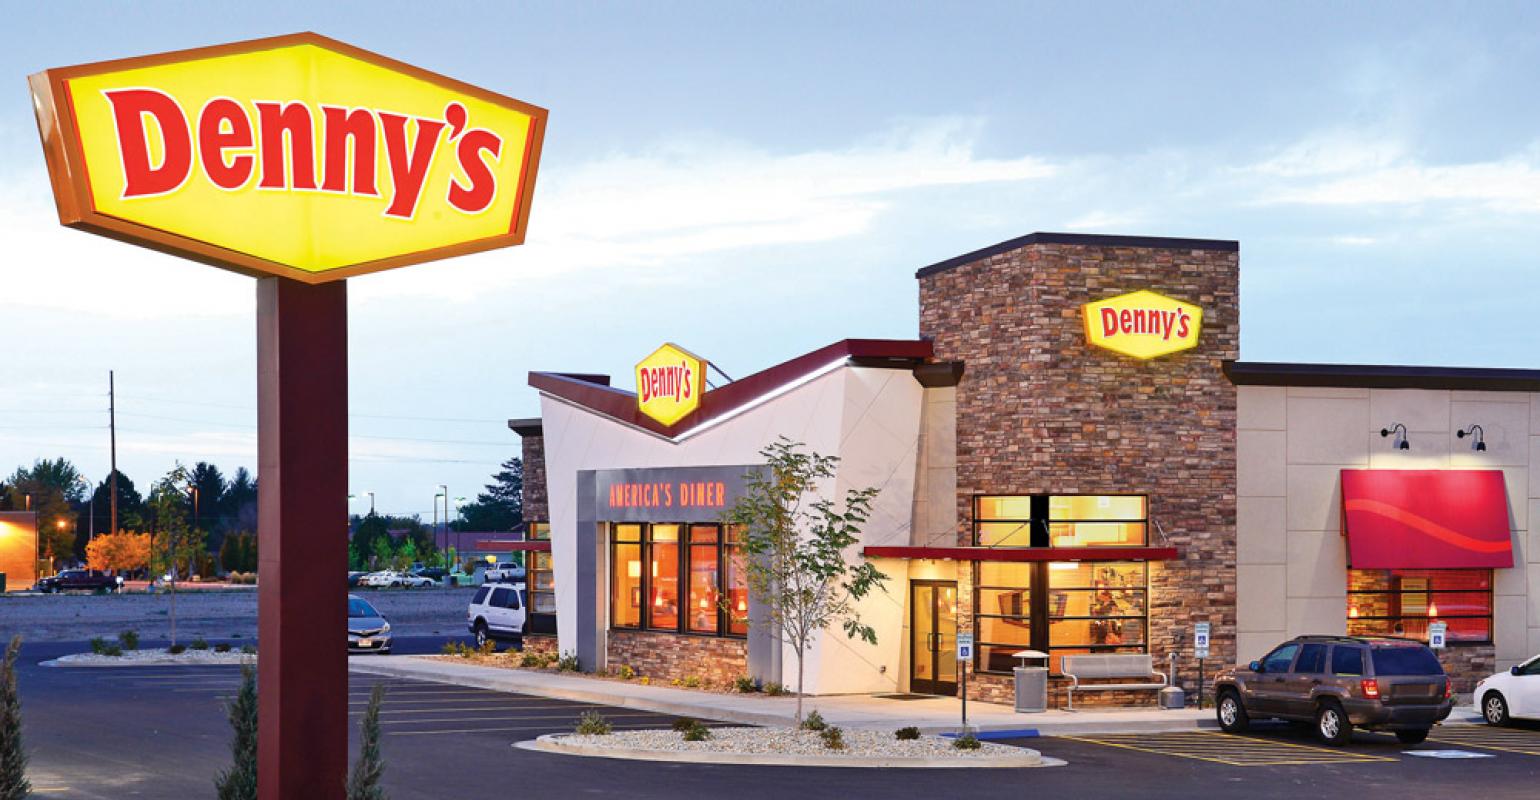 Denny’s invests in kitchen equipment to expand daypart menus Nation's